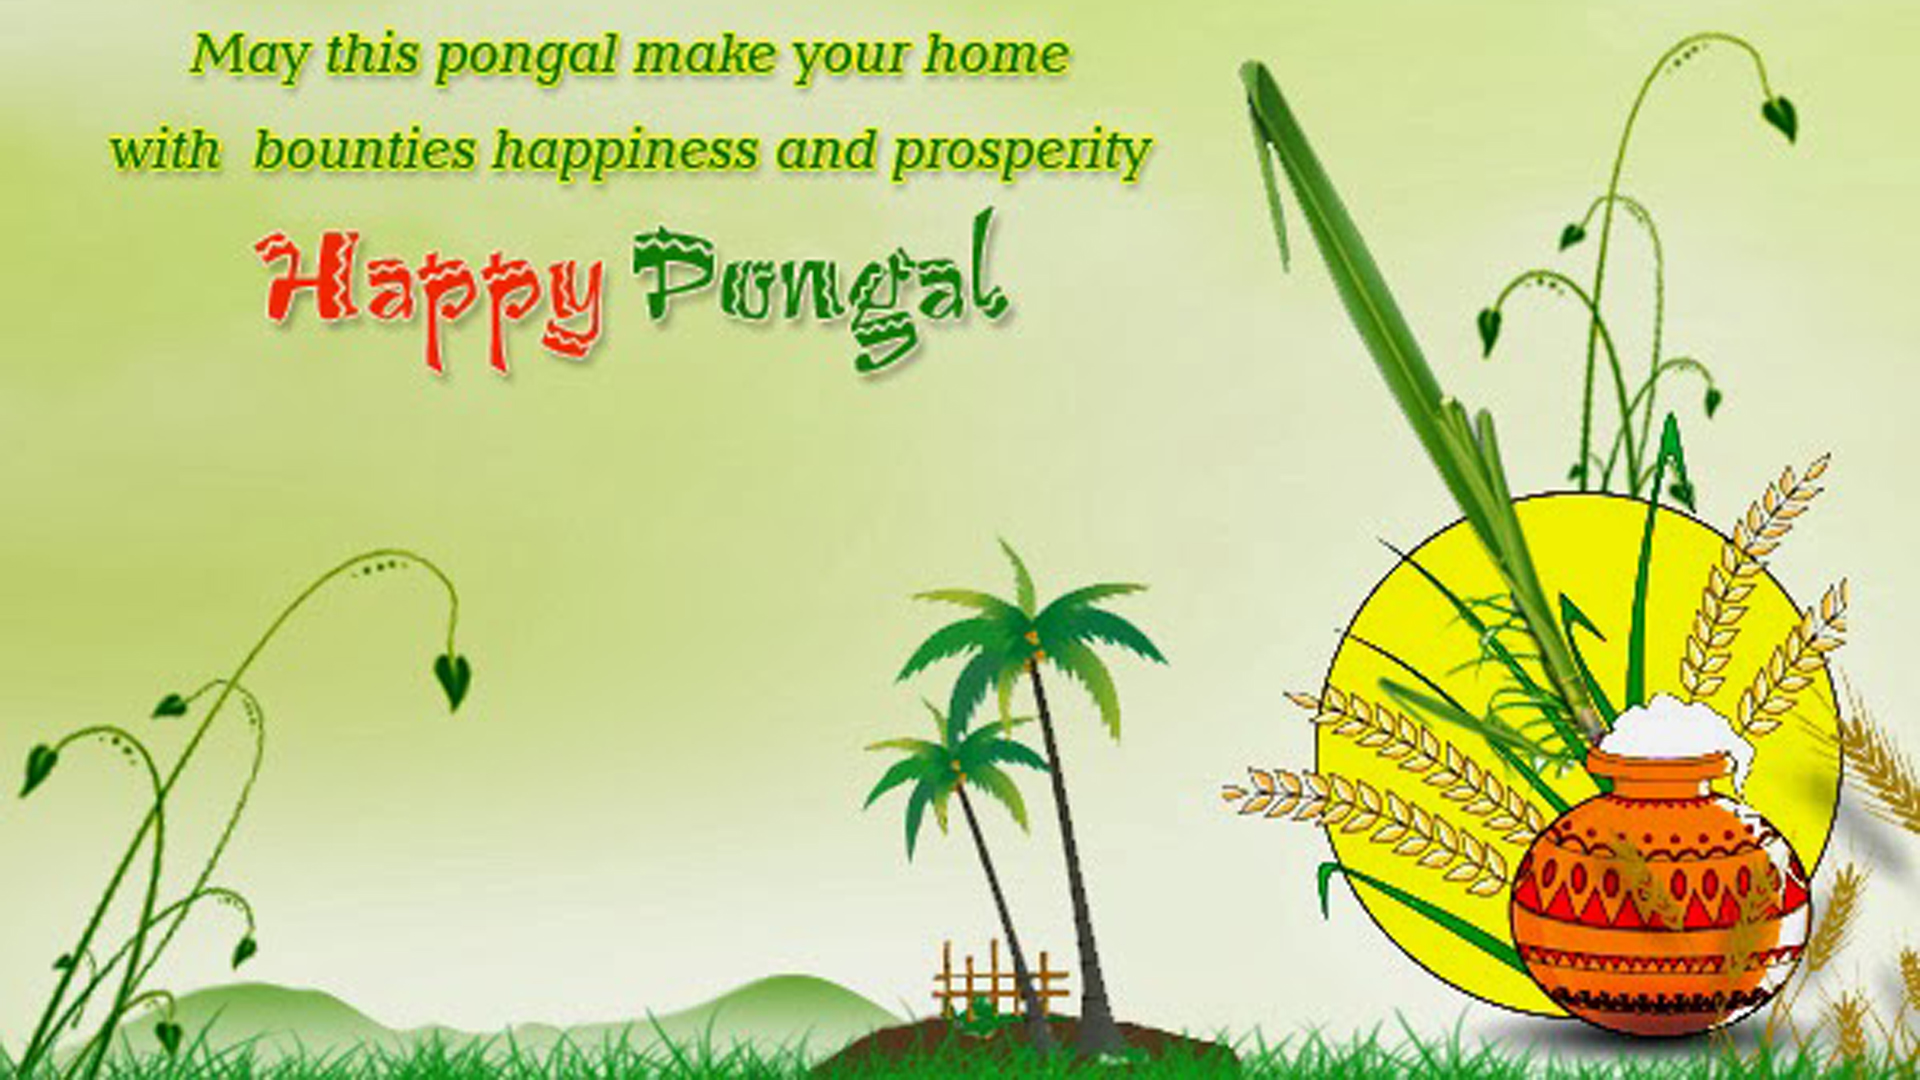 May This Pongal Make Your Home With Bounties Happiness And Prosperity Happy Pongal 2K Pongal